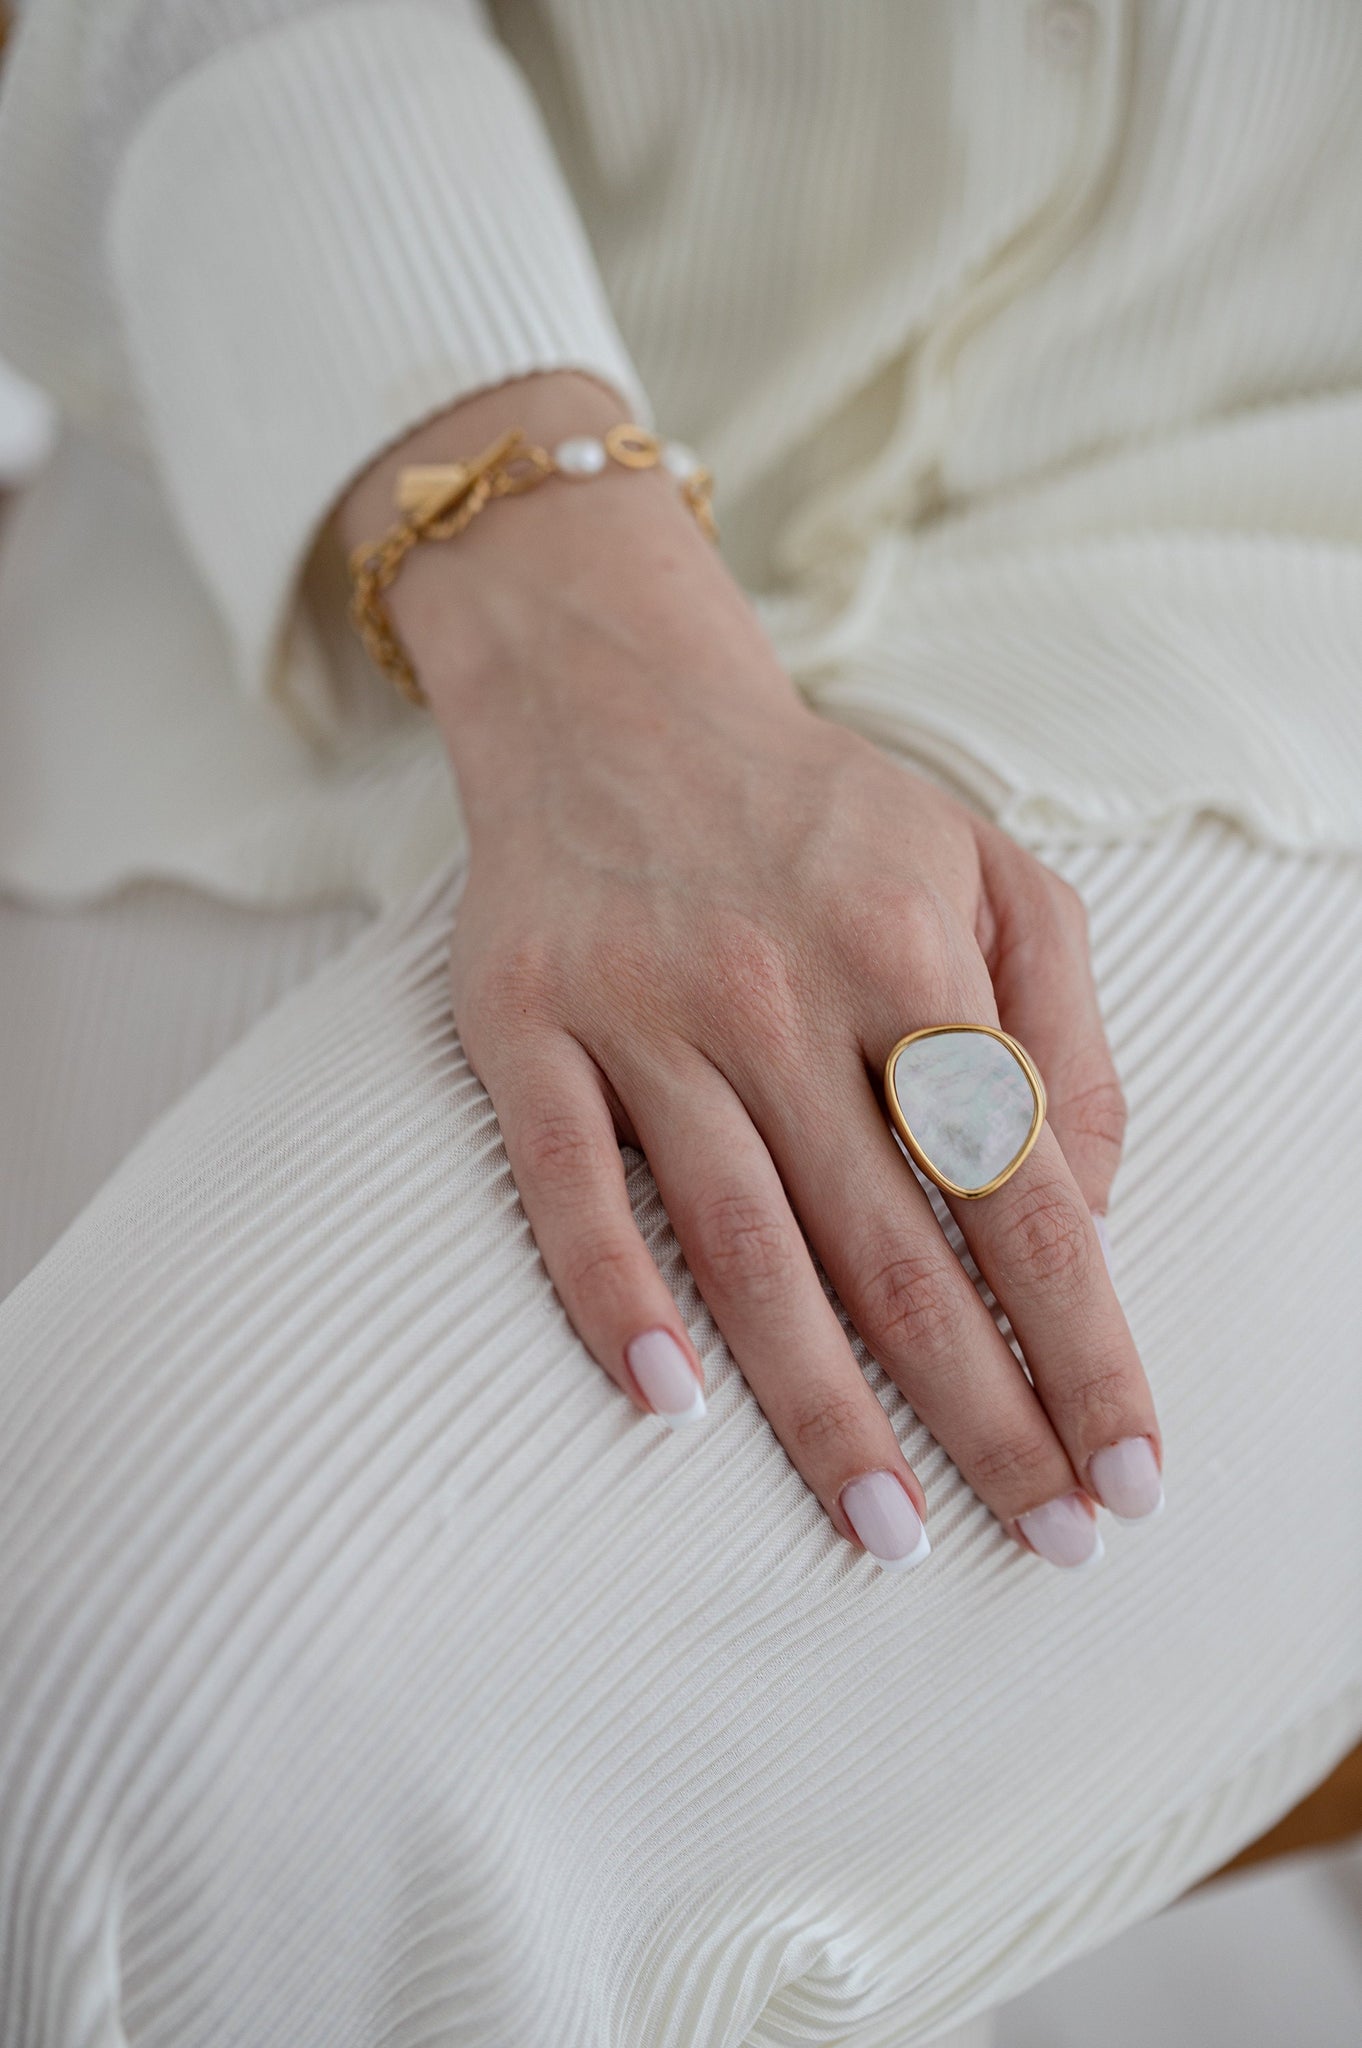 White Shell Ring, 18K Gold, Jewelry For Mom, Rings For Women, Mothers Day Gift, Waterproof Mother Ring, New Mom Gift, Unique Summer Jewelry